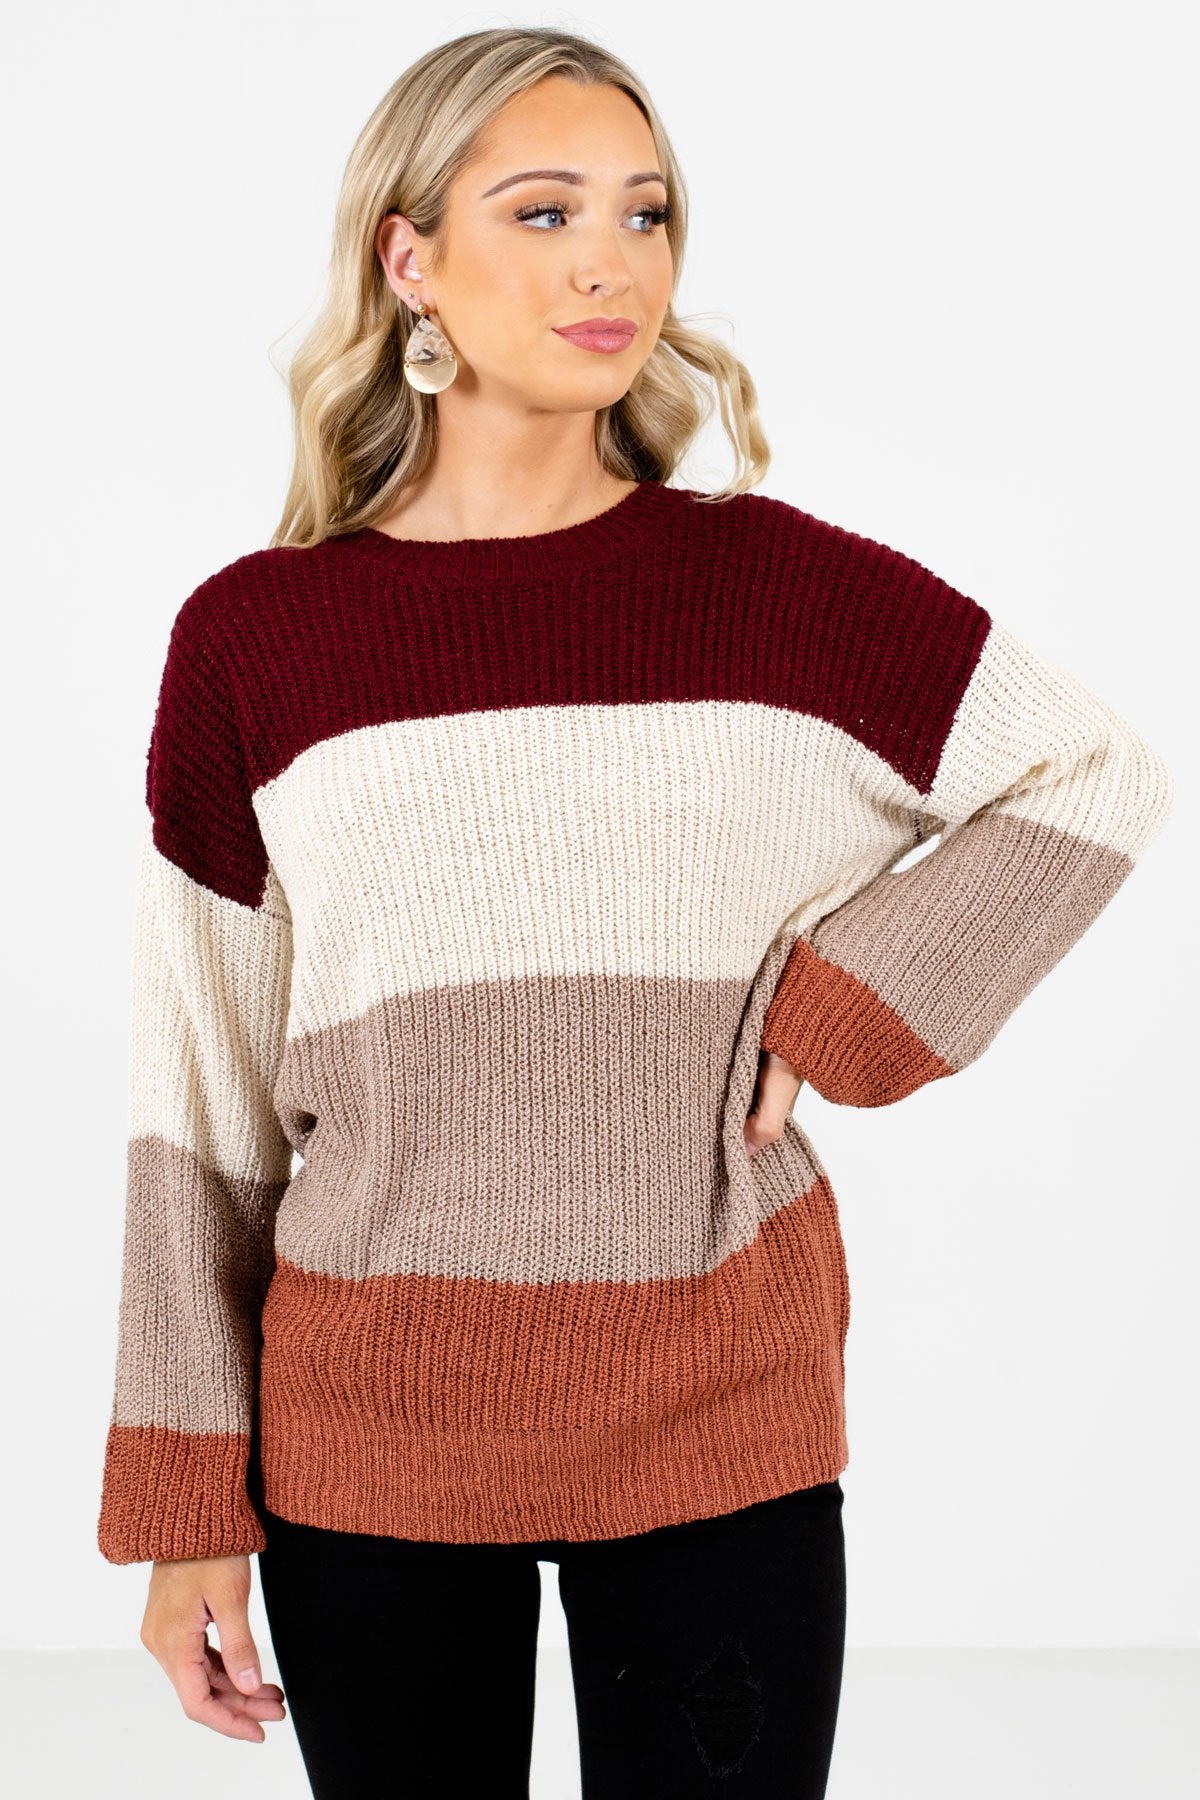 Women’s Taupe Brown Warm and Cozy Boutique Clothing